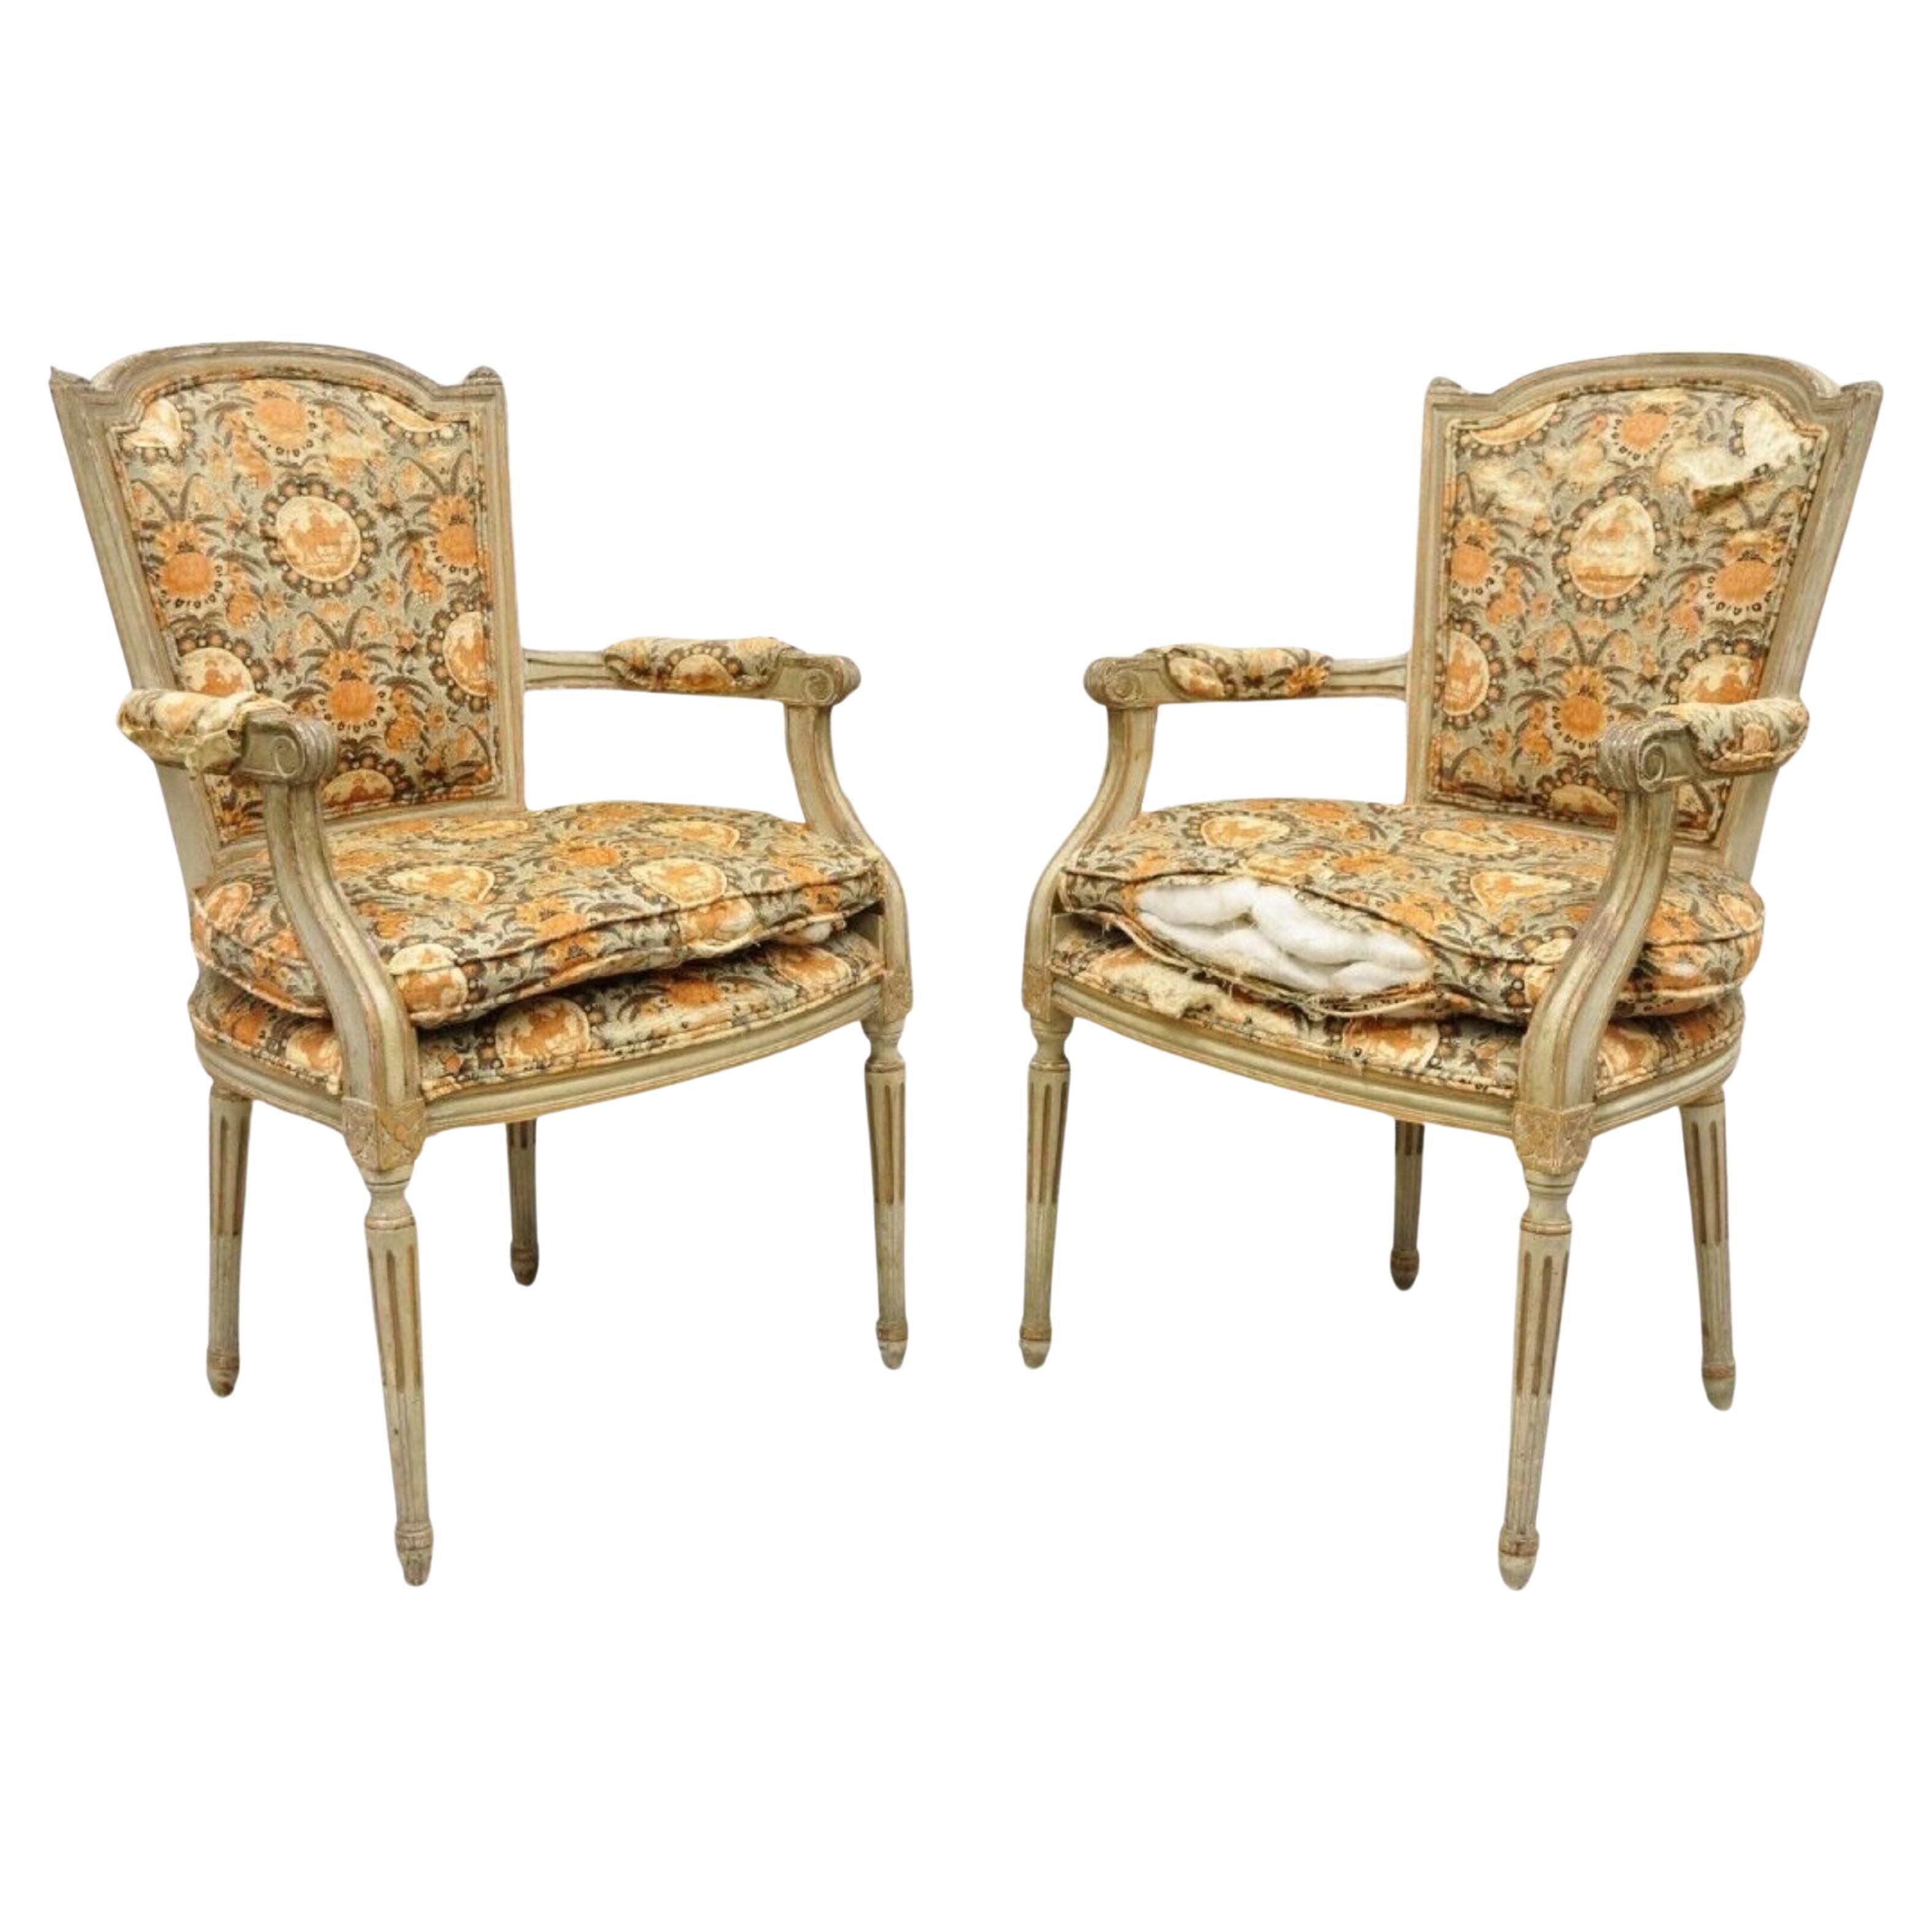 Fine Pair Of Louis XVI Style Antique Arm Chairs #260201